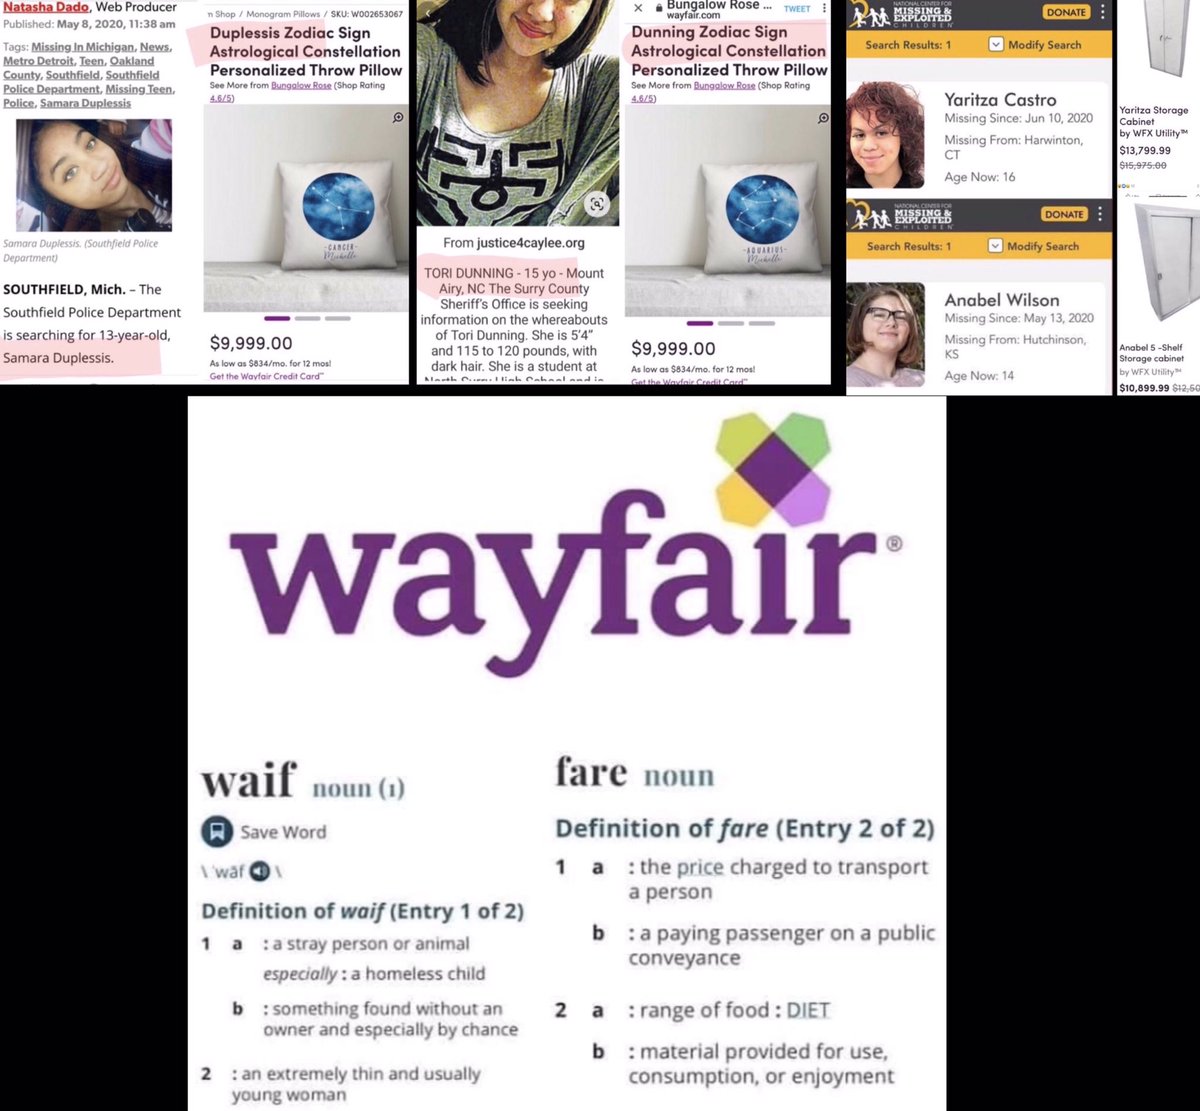 PART 61: Wayfair This is one is lengthy.This method of purchasing a person is not uncommon. The elites do this so their tax records look normal when in reality they are buying a human being.